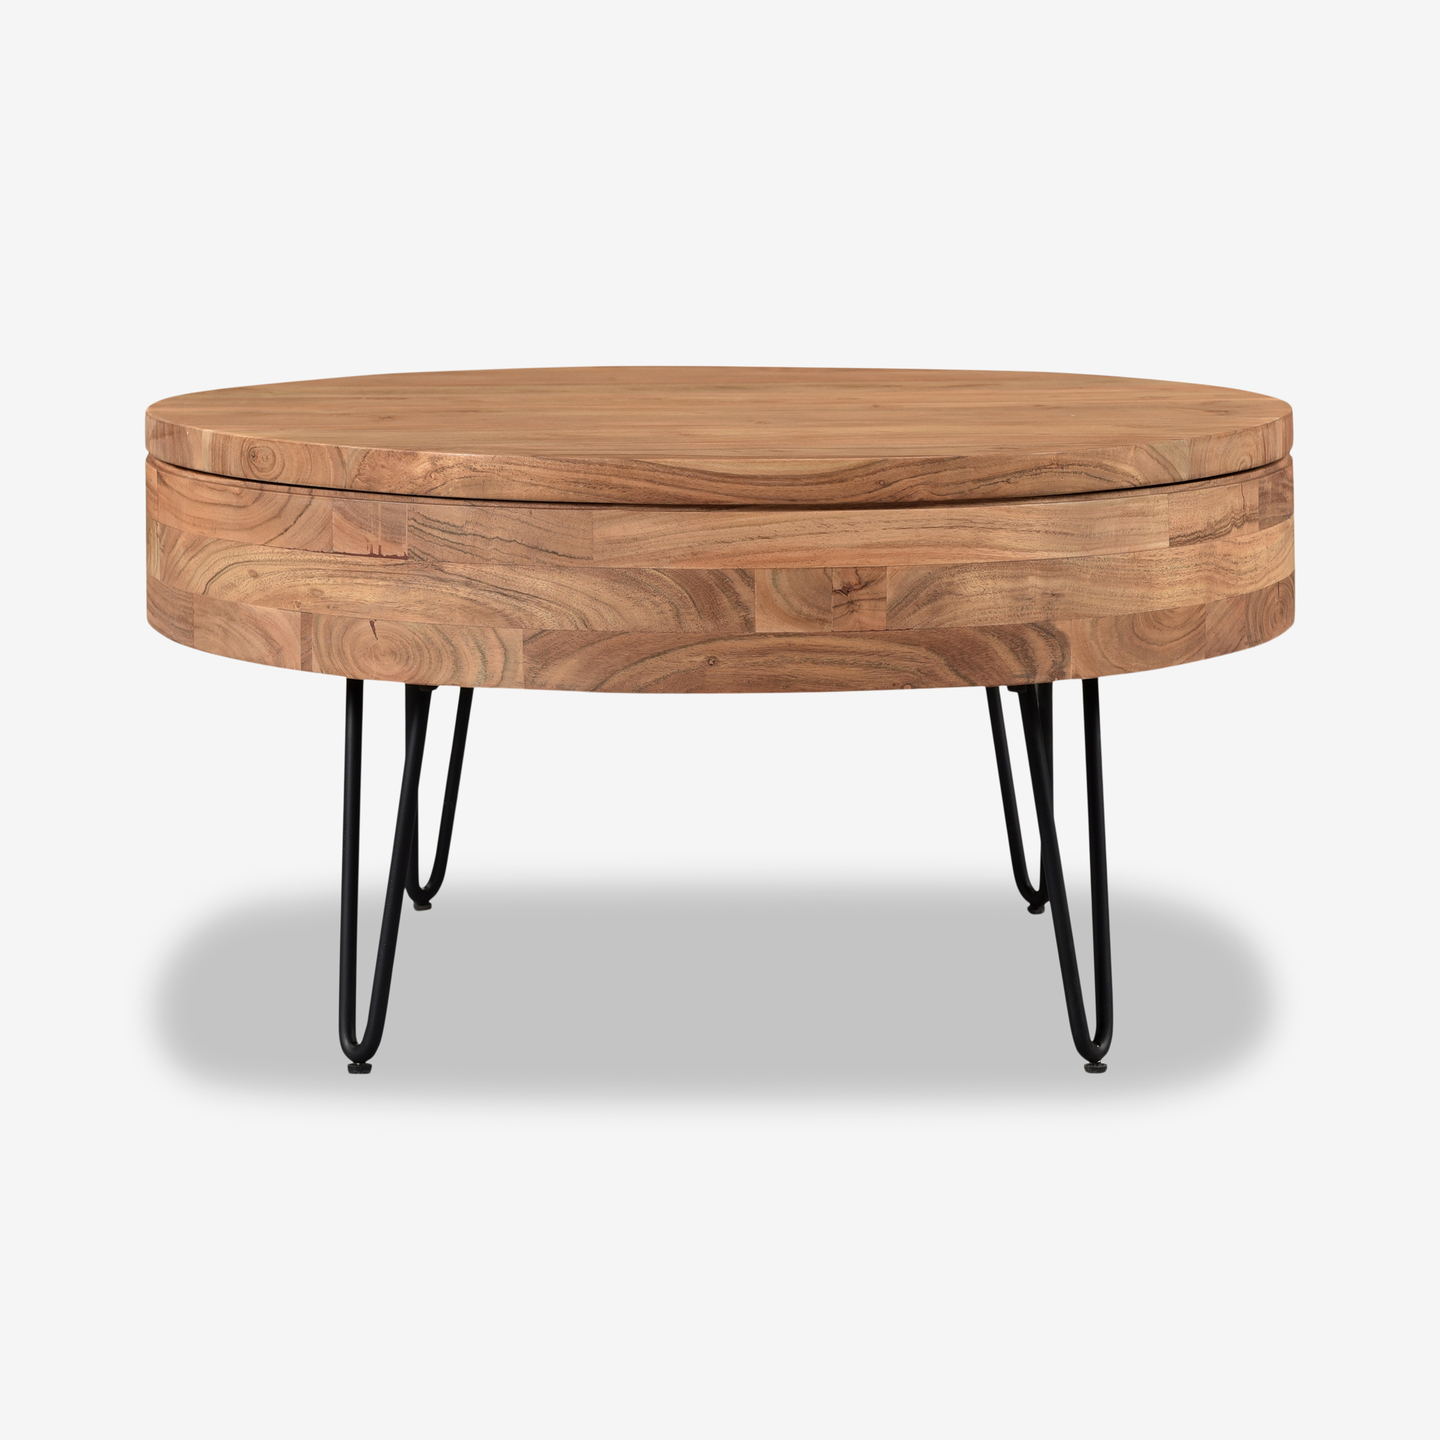 1585_Caleb-Coffee-Table_Front_2021